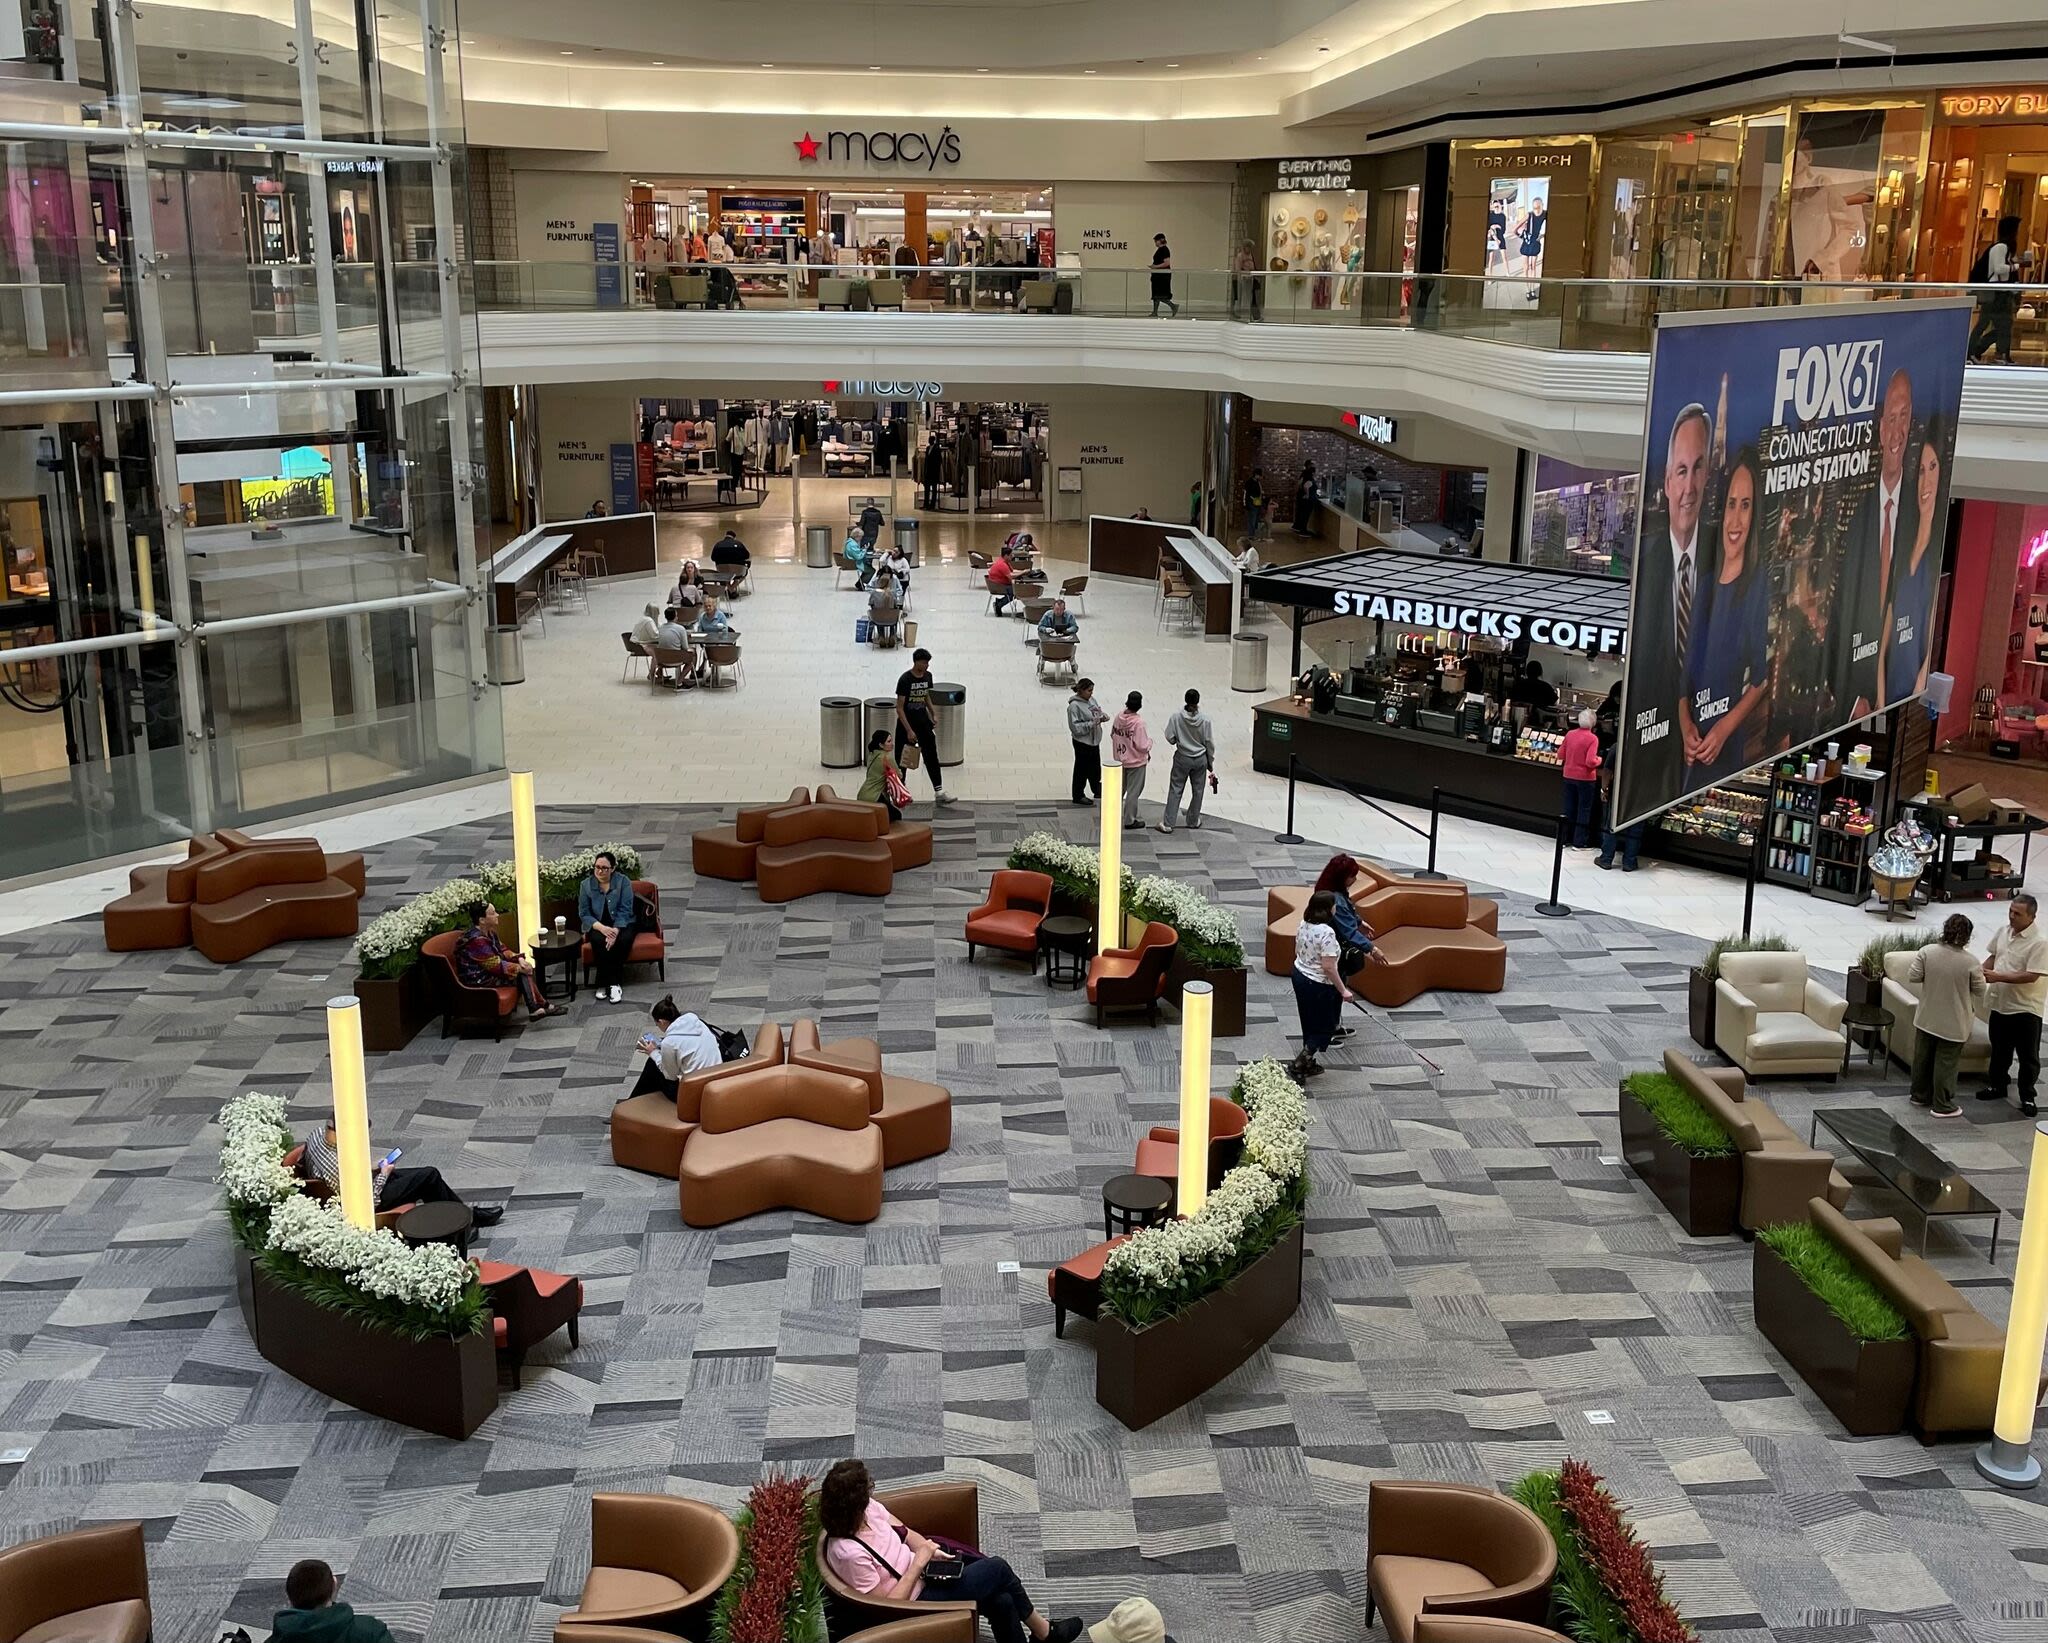 Malls around the country are declining, but this Connecticut one is among the busiest in New England